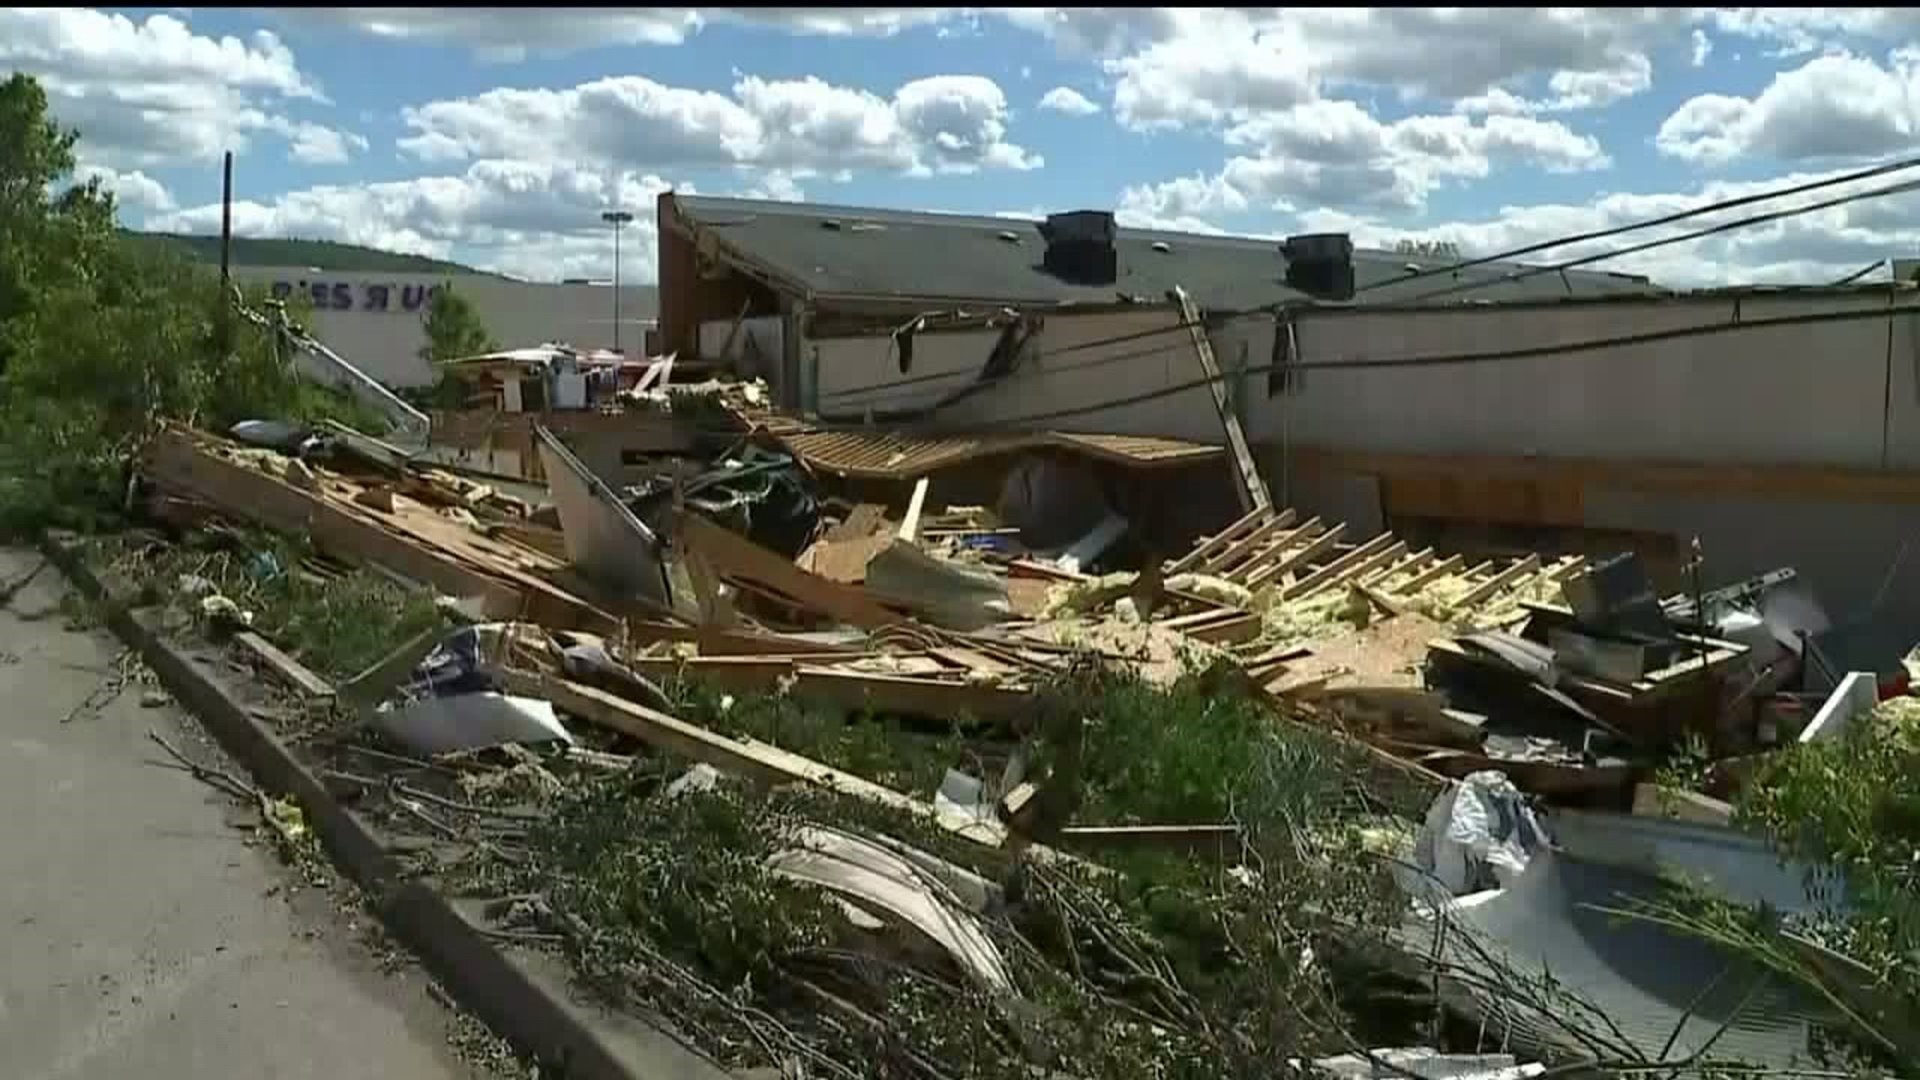 Here`s the List of Businesses Destroyed by Tornado in Luzerne County